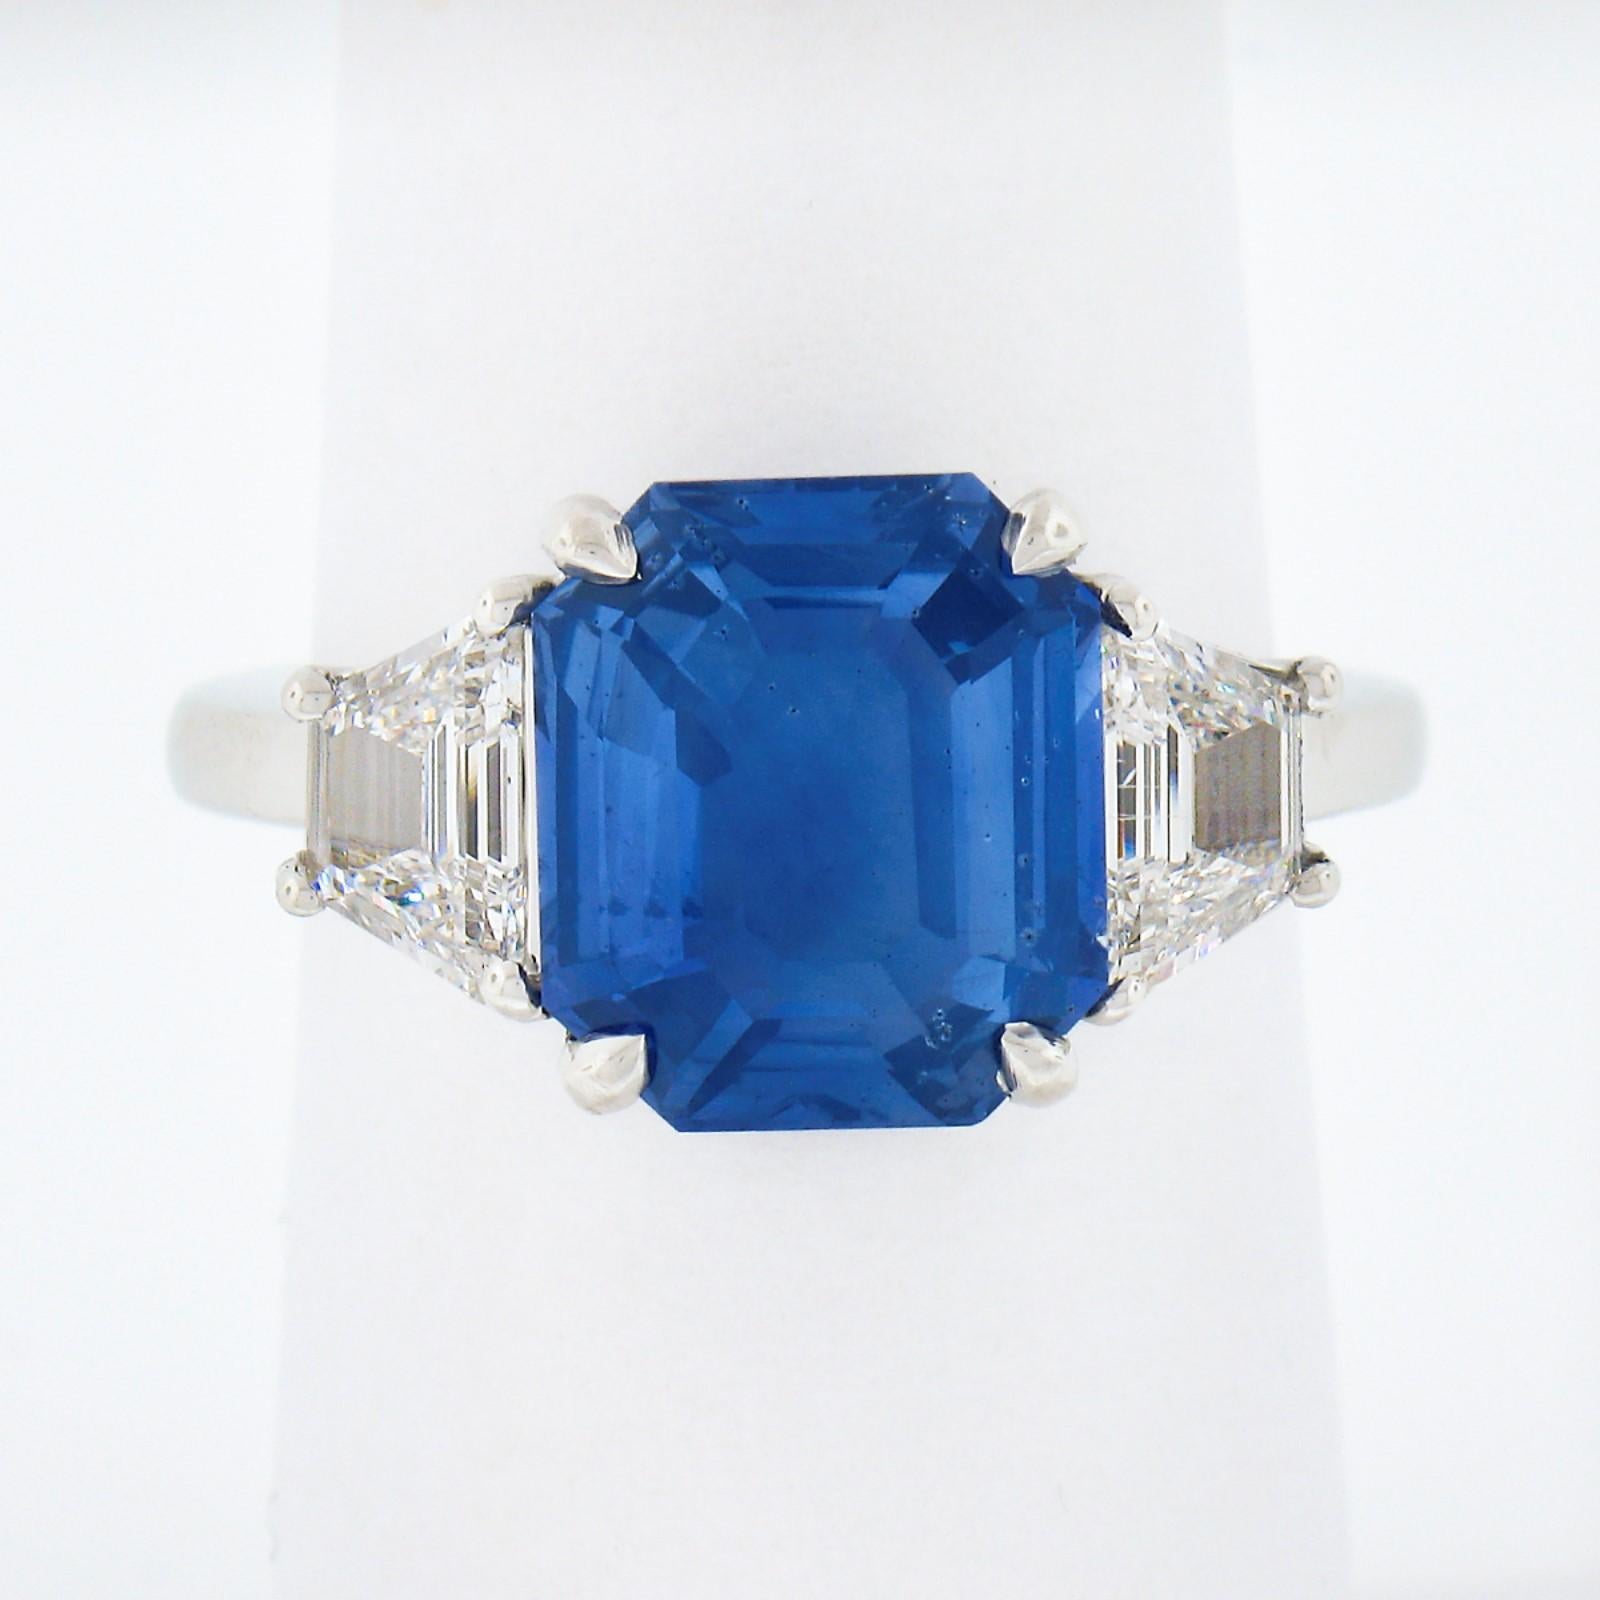 Here we have an absolutely magnificent, custom designed, sapphire and diamond three stone engagement ring that is newly crafted in solid platinum. It features a truly breathtaking, GIA certified, emerald step cut sapphire solitaire that is neatly